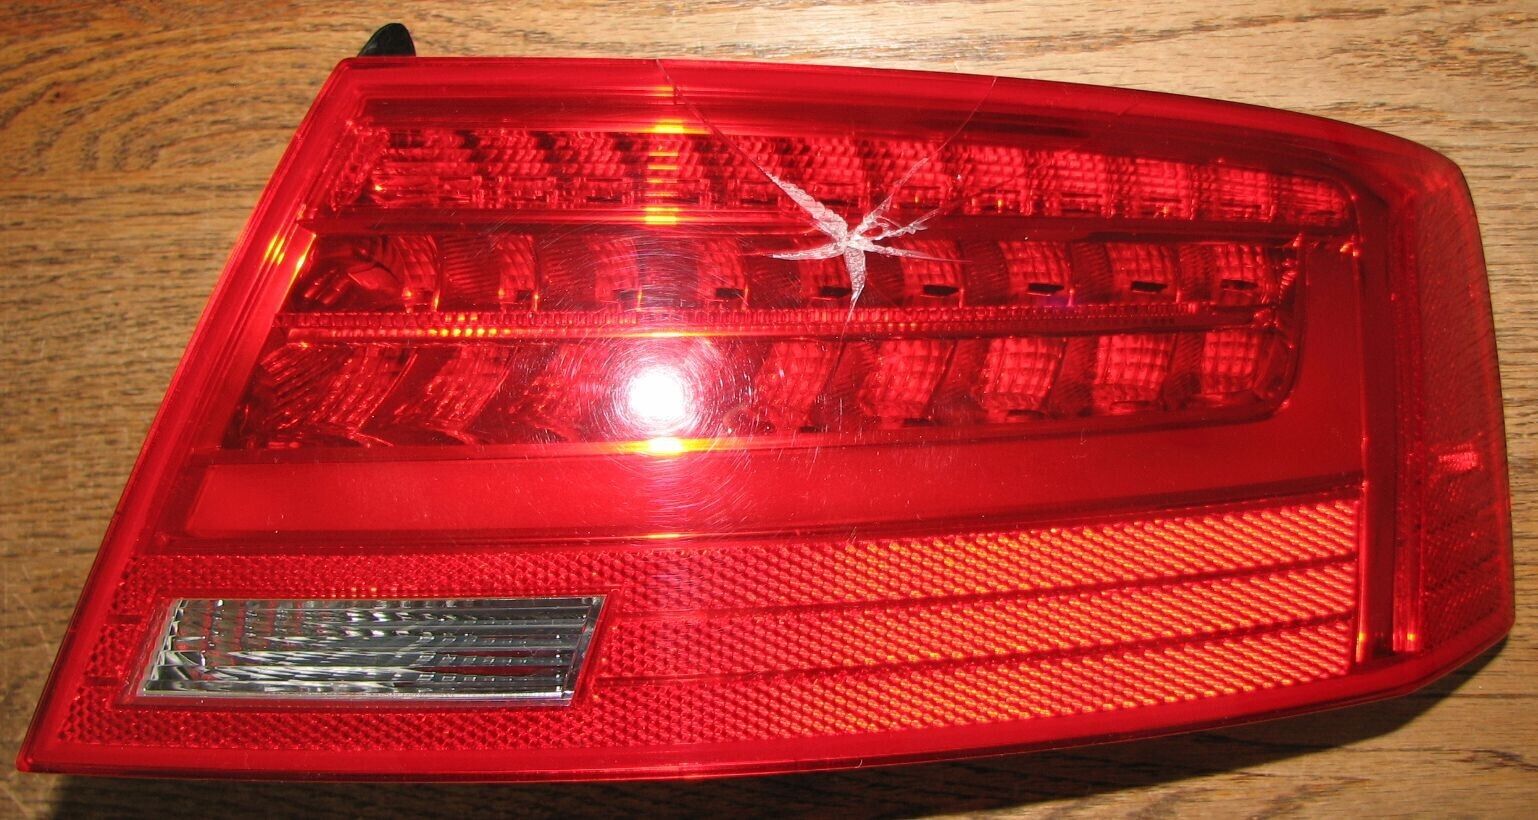 2013-2015 AUDI A5 S5 Right Quarter Mounted Tail Light 8T0945096J - CRACKED LENS